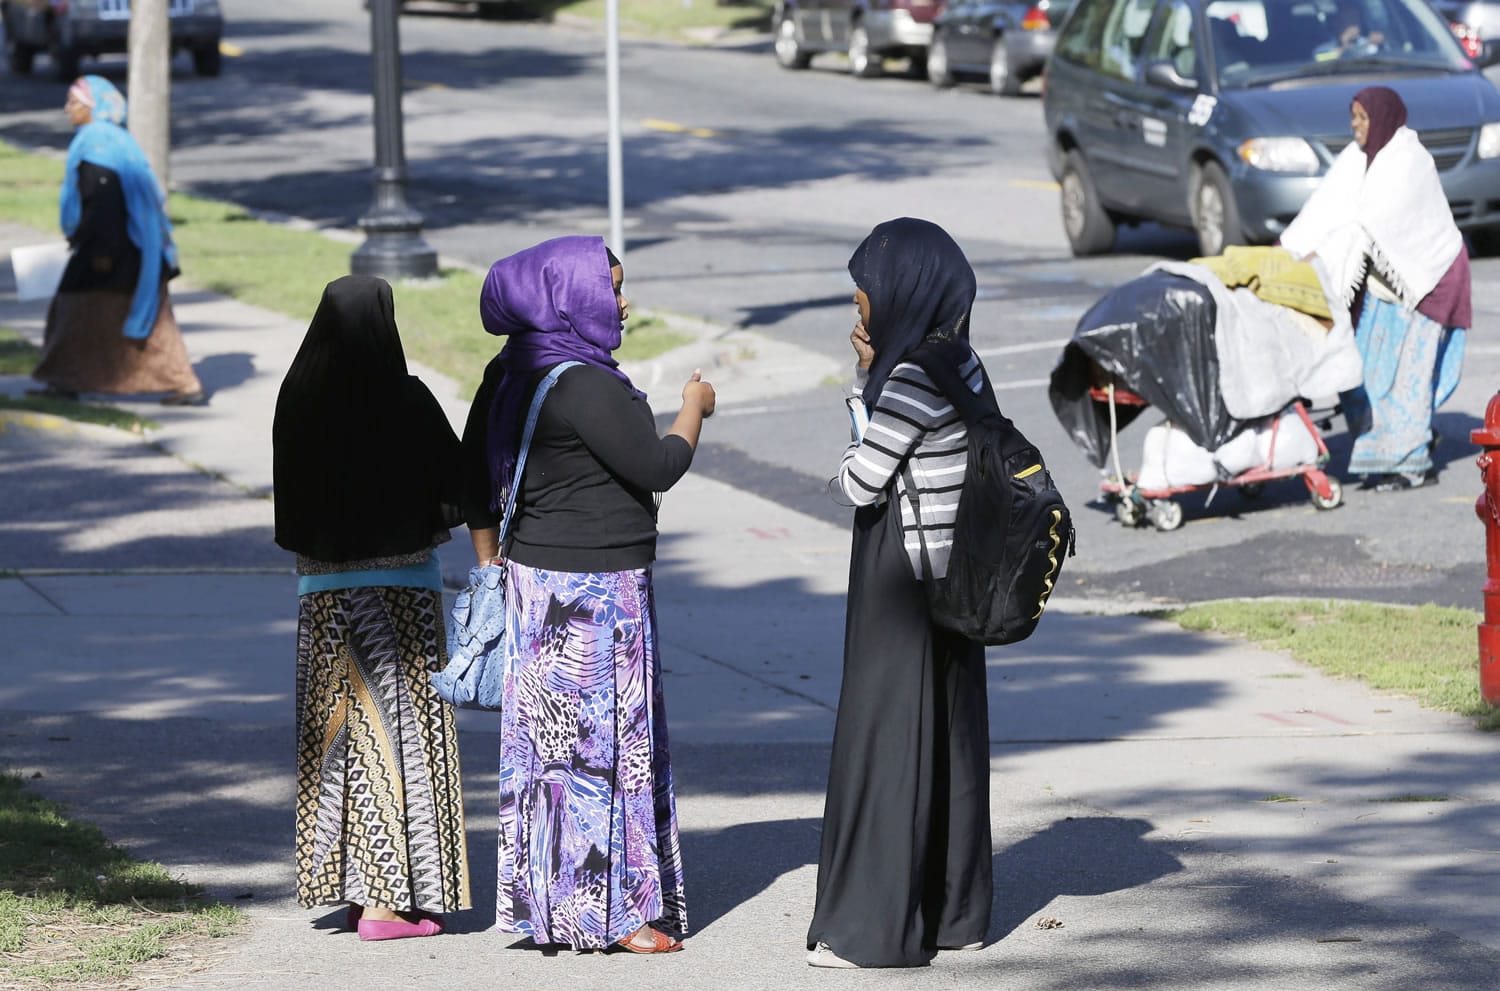 Members of the Somali community visit near a park in Minneapolis.